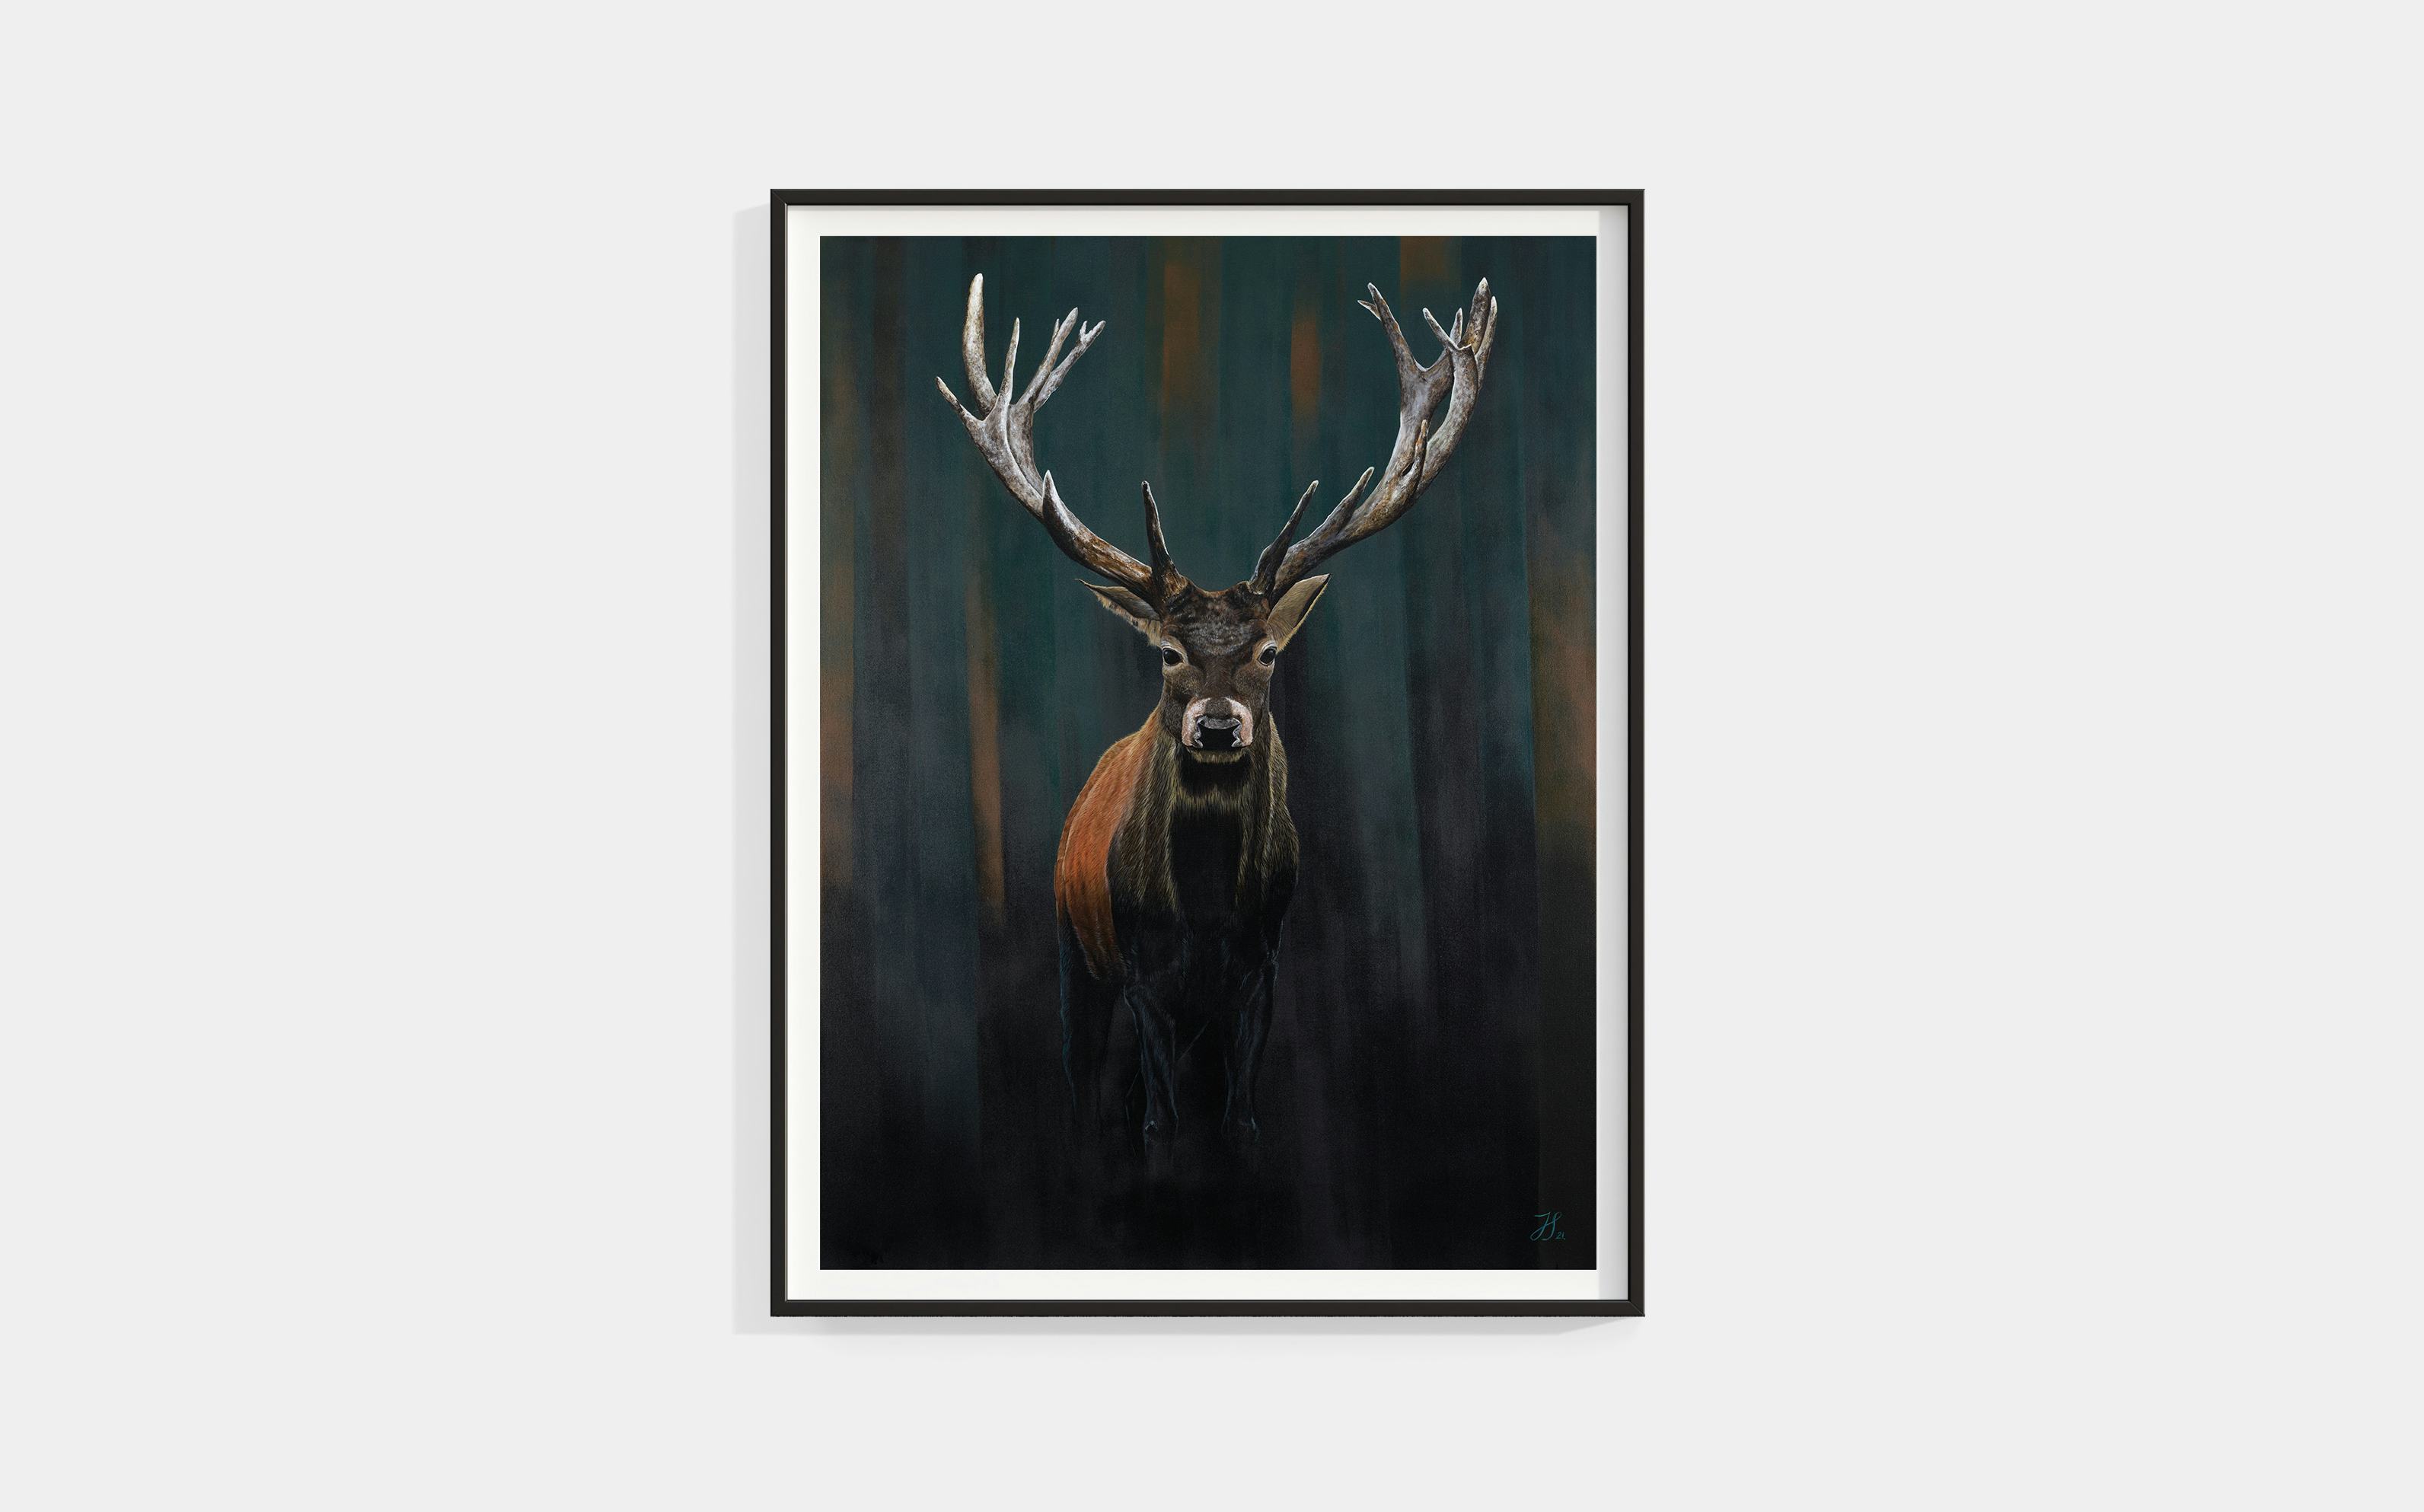 Framed painting of a New Zealand red stag on a dark background.